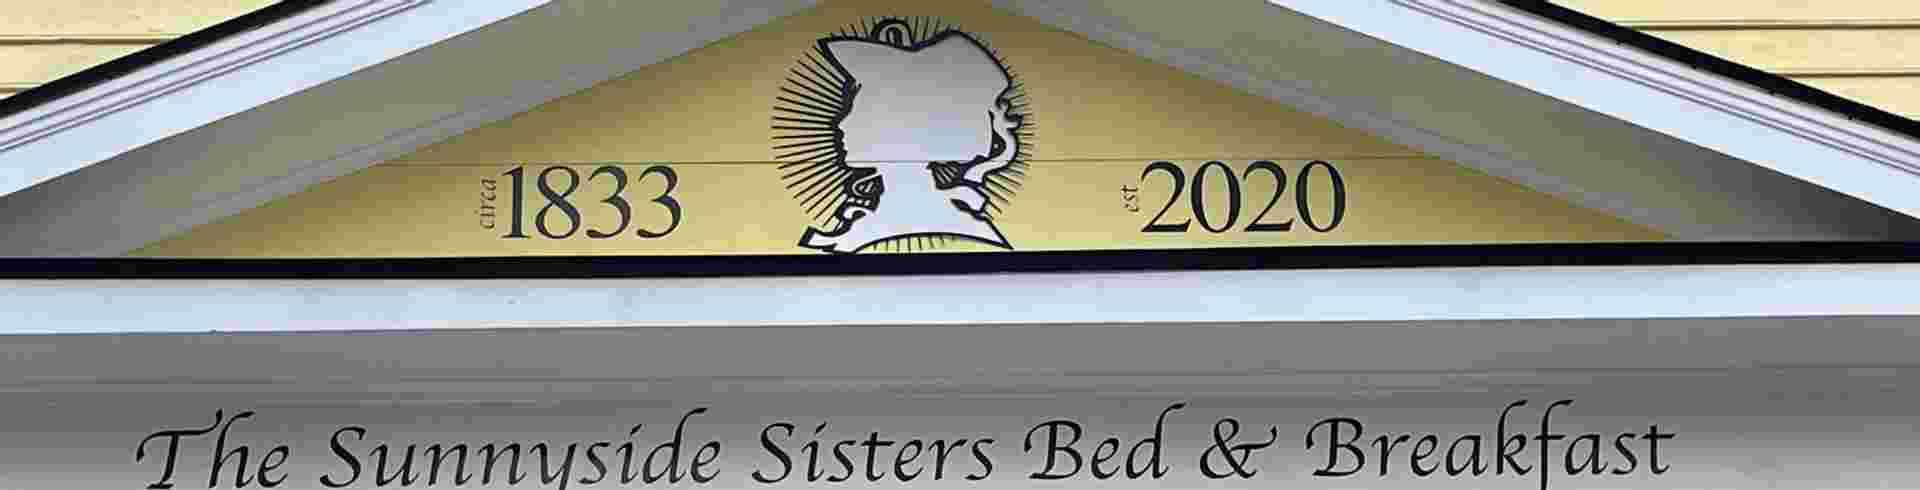 The Sunnyside Sisters Bed and Breakfast / Clarksville VA / The Sunnyside Sisters Bed and Breakfast